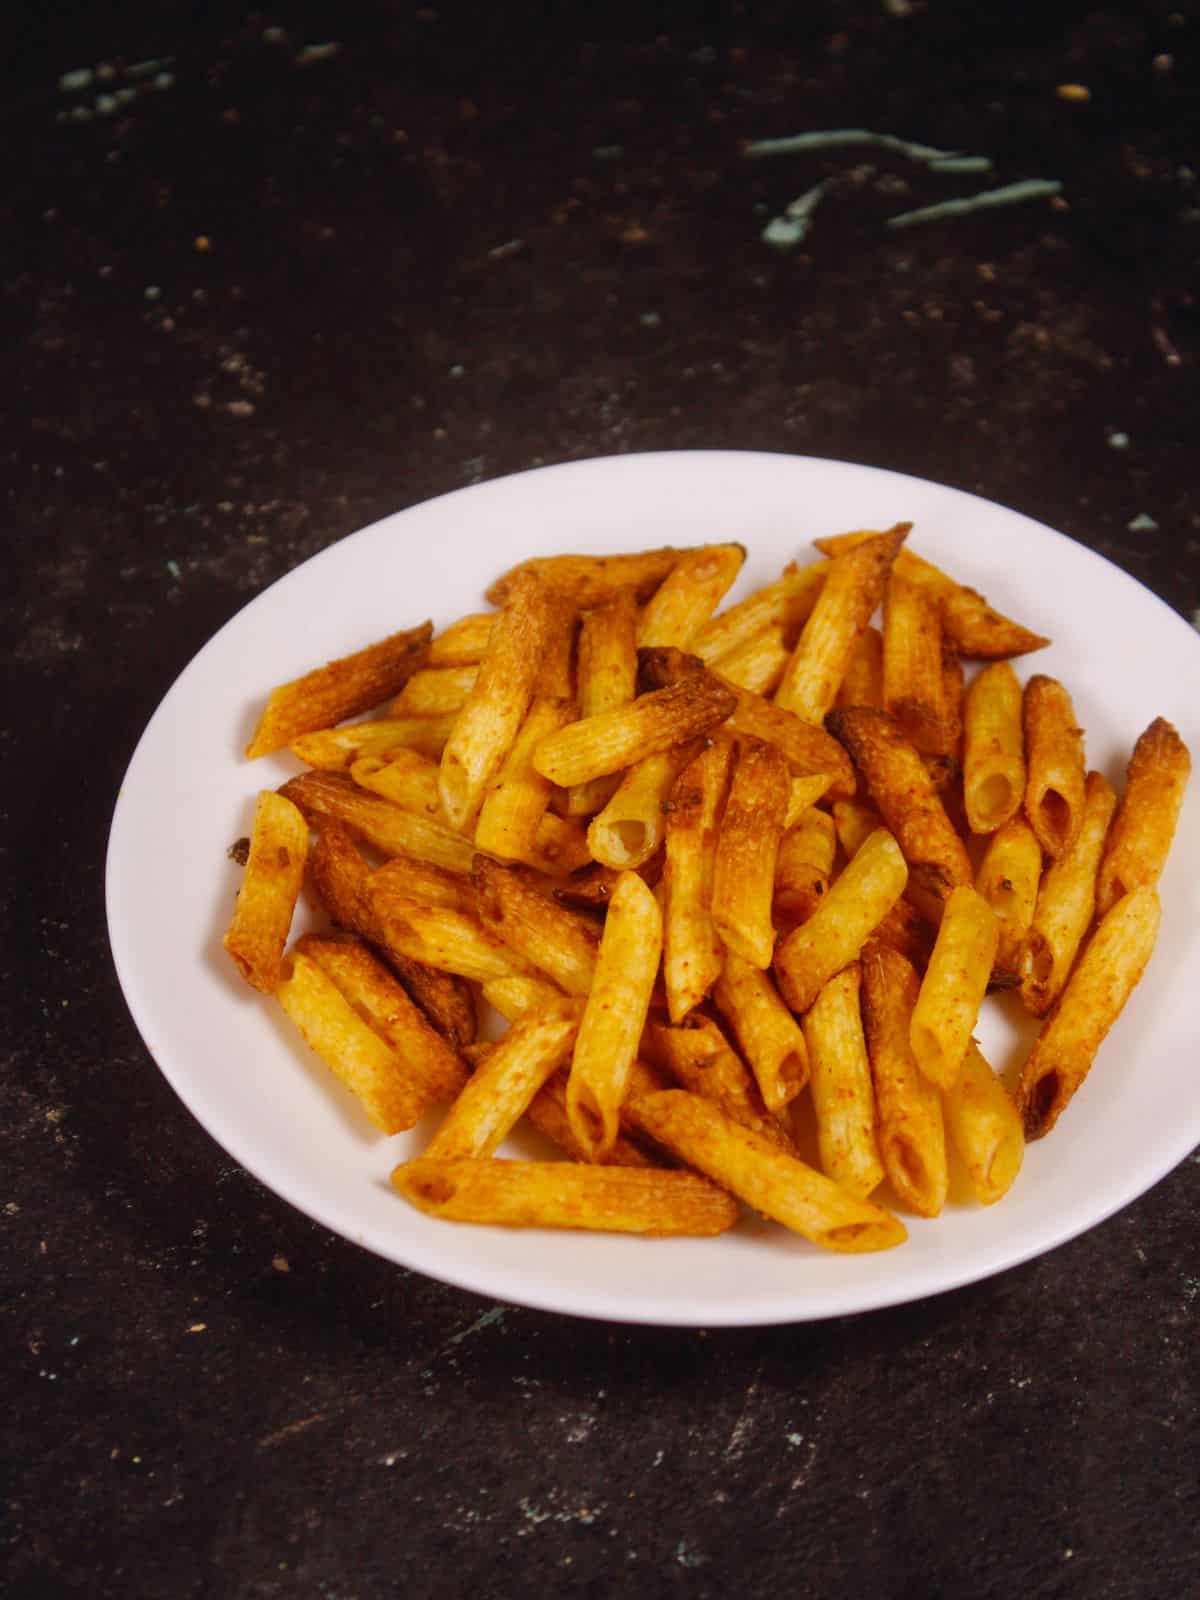 sprinkle remaining pasta mix after cooking and enjoy air fried pasta chips with any dip 